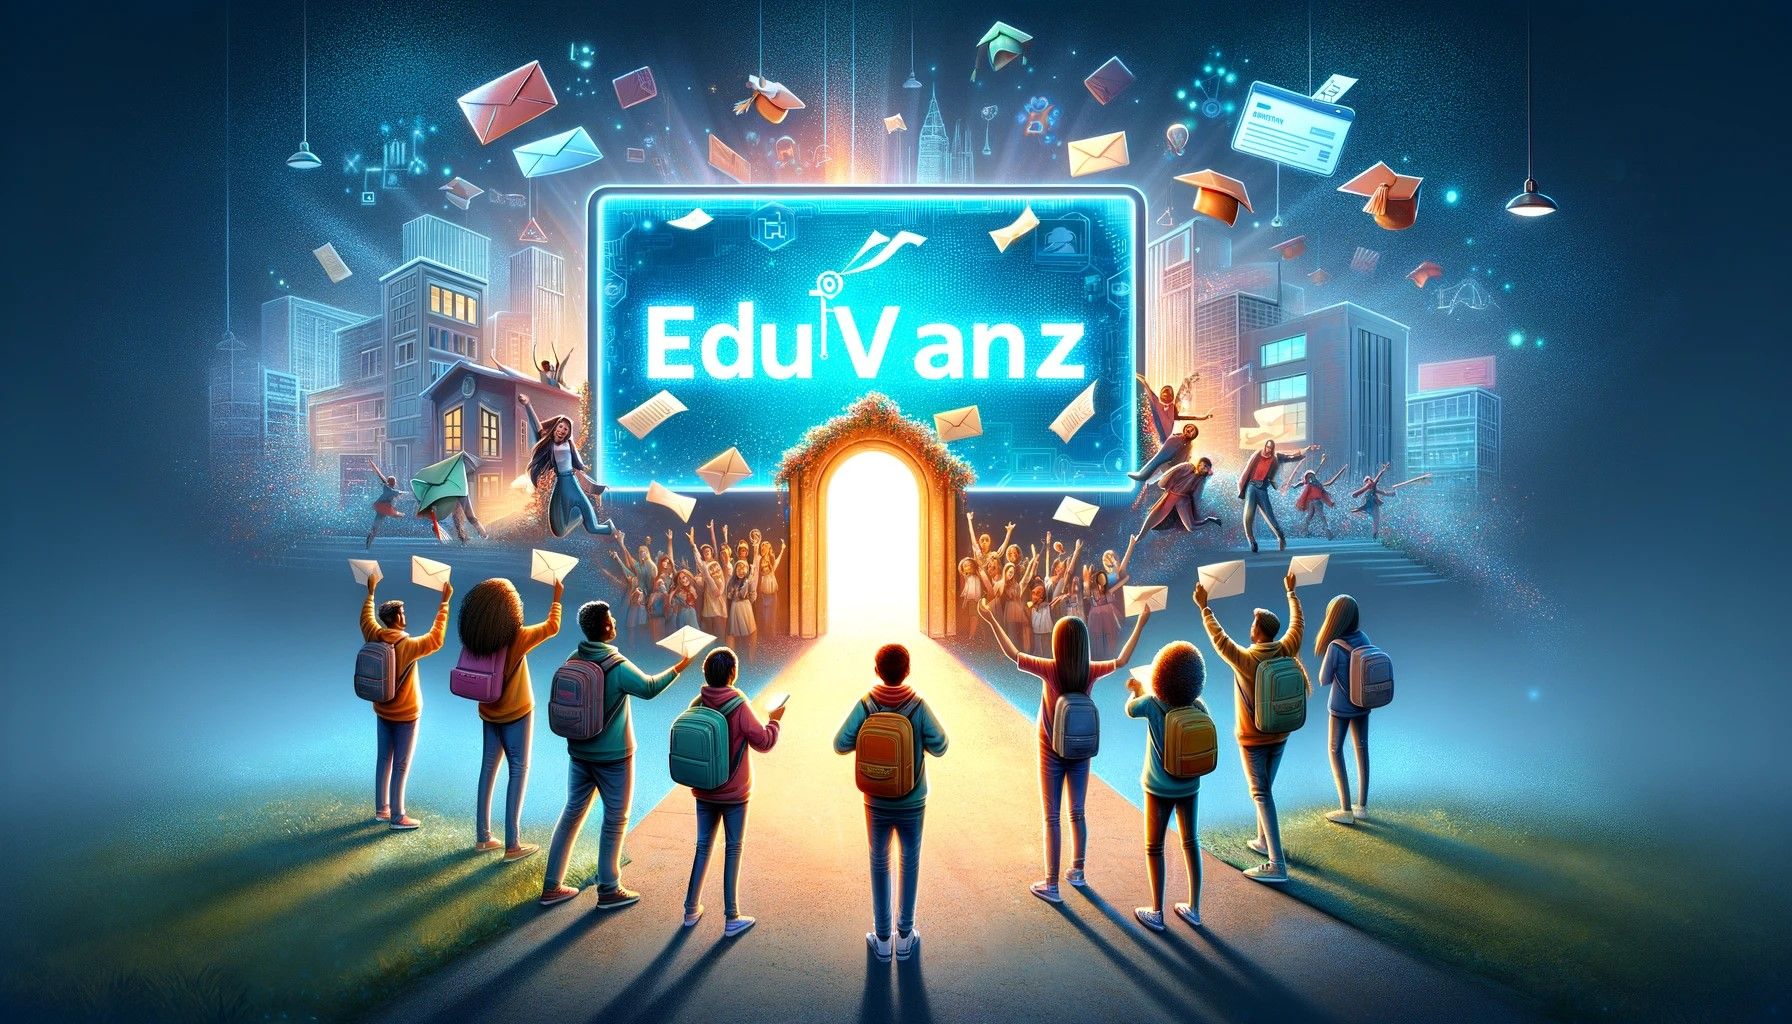 Eduvanz: Pioneering Flexible Financing Solutions for Higher Education